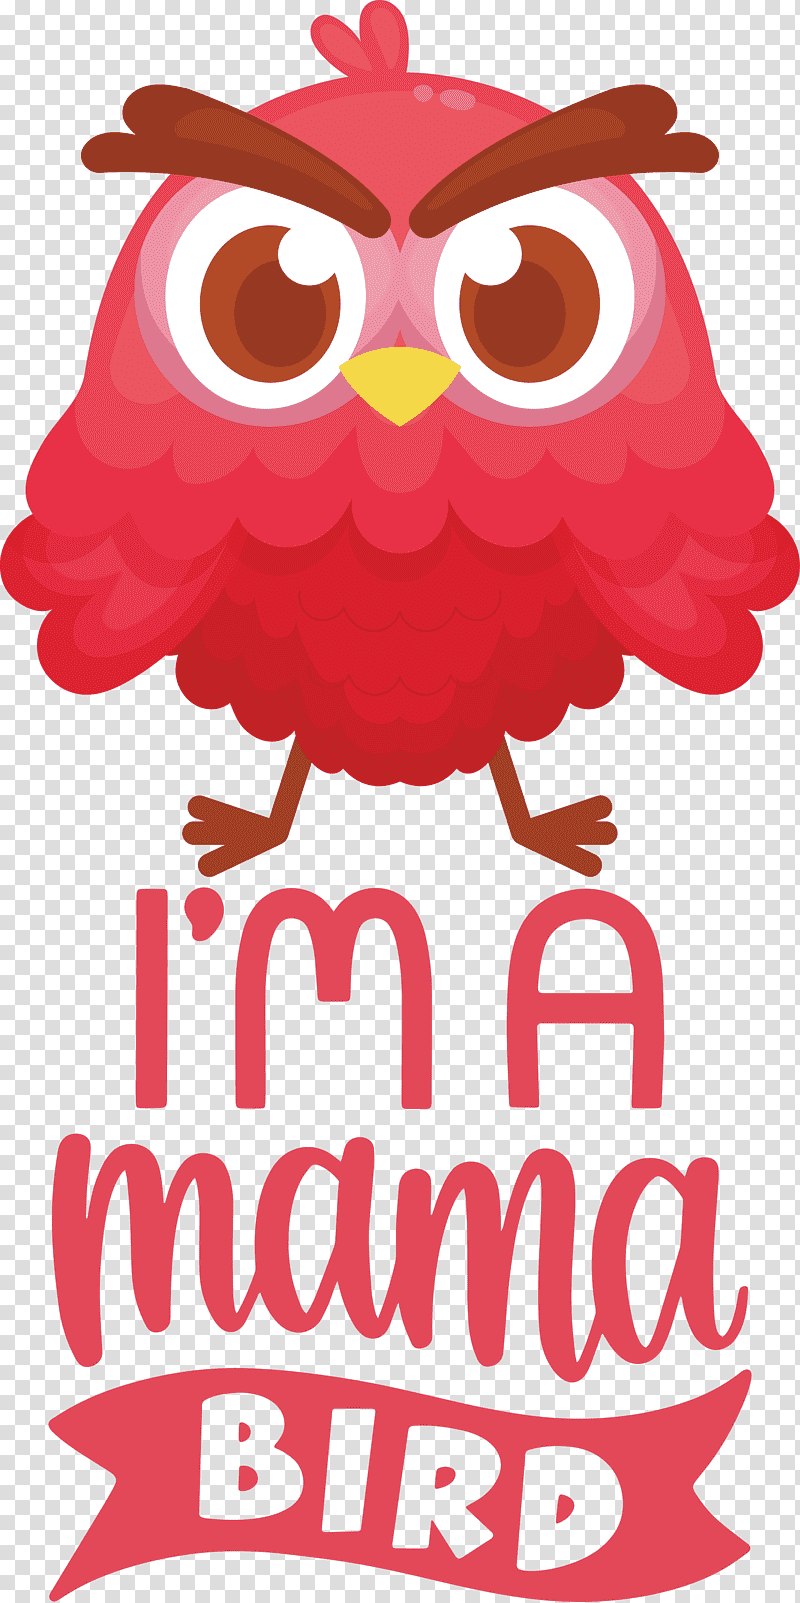 Mama Bird Bird Quote, Eastern Screech Owl, Snowy Owl, Great Horned Owl, Owls, Birds, Barred Owl transparent background PNG clipart